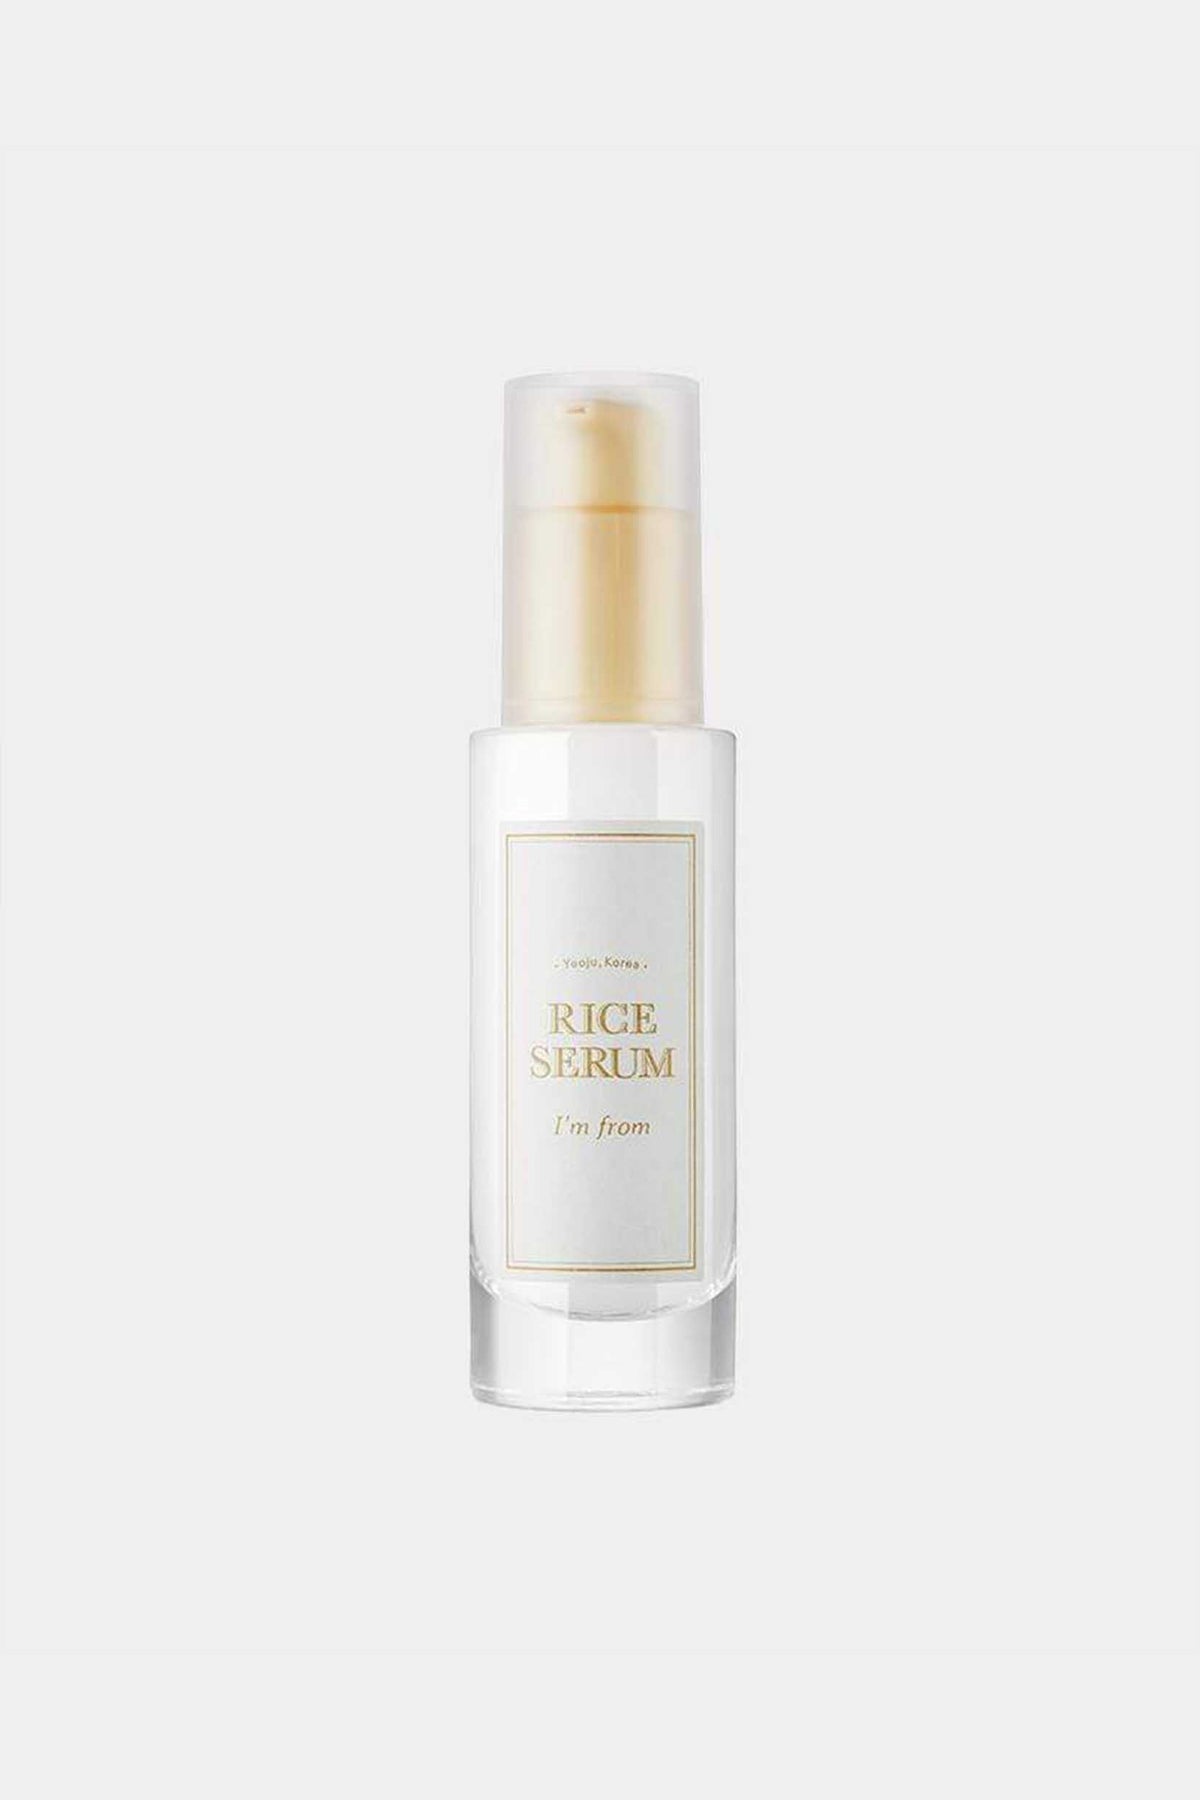 I'm From - Rice Serum - 30ml | Afterpay available - Kanvas Beauty Australia